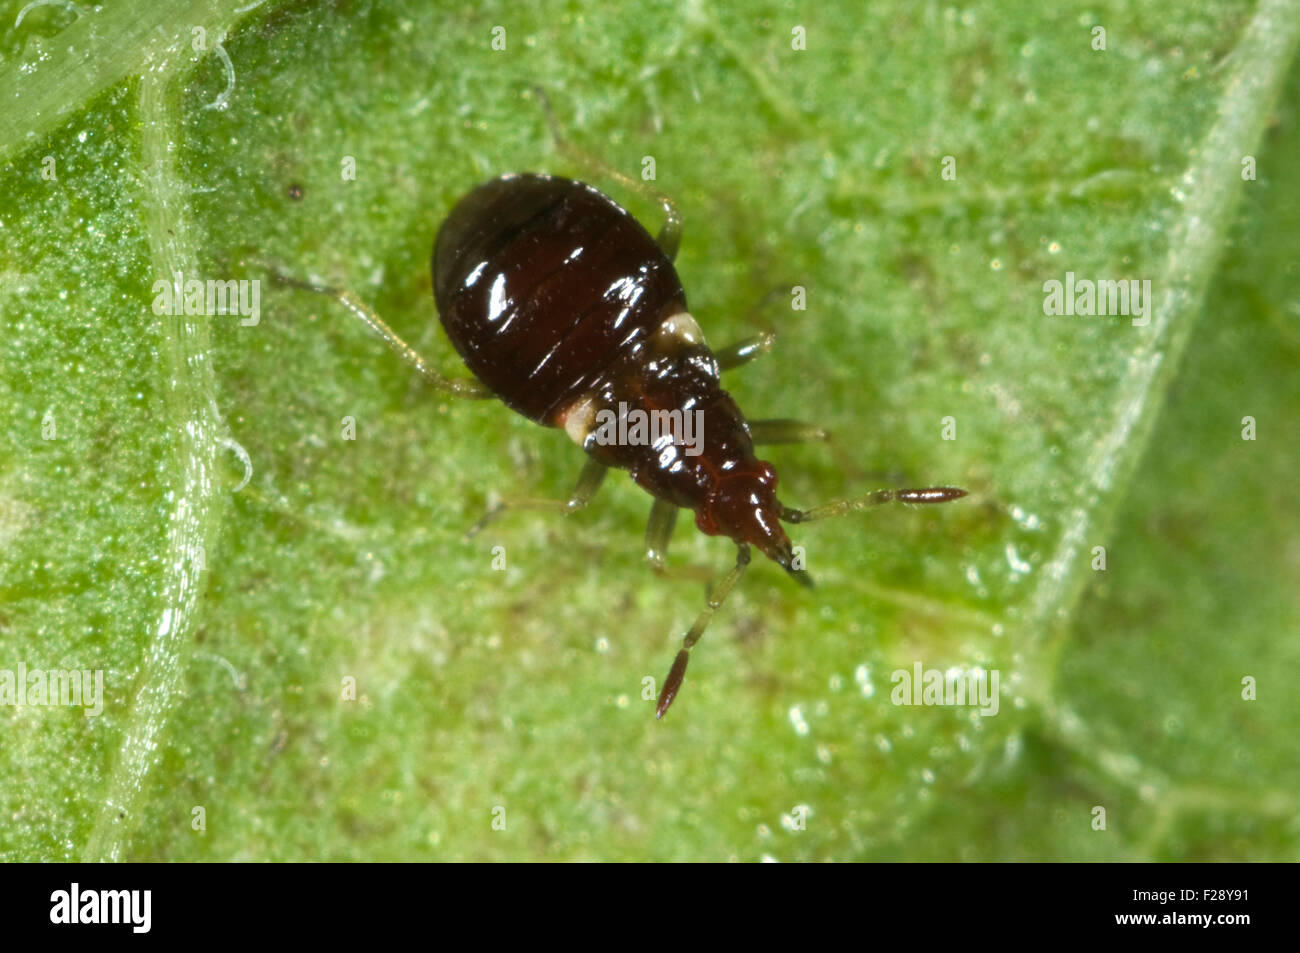 A flower bug nymph, Anthocoris spp., a young insect predator, August Stock Photo